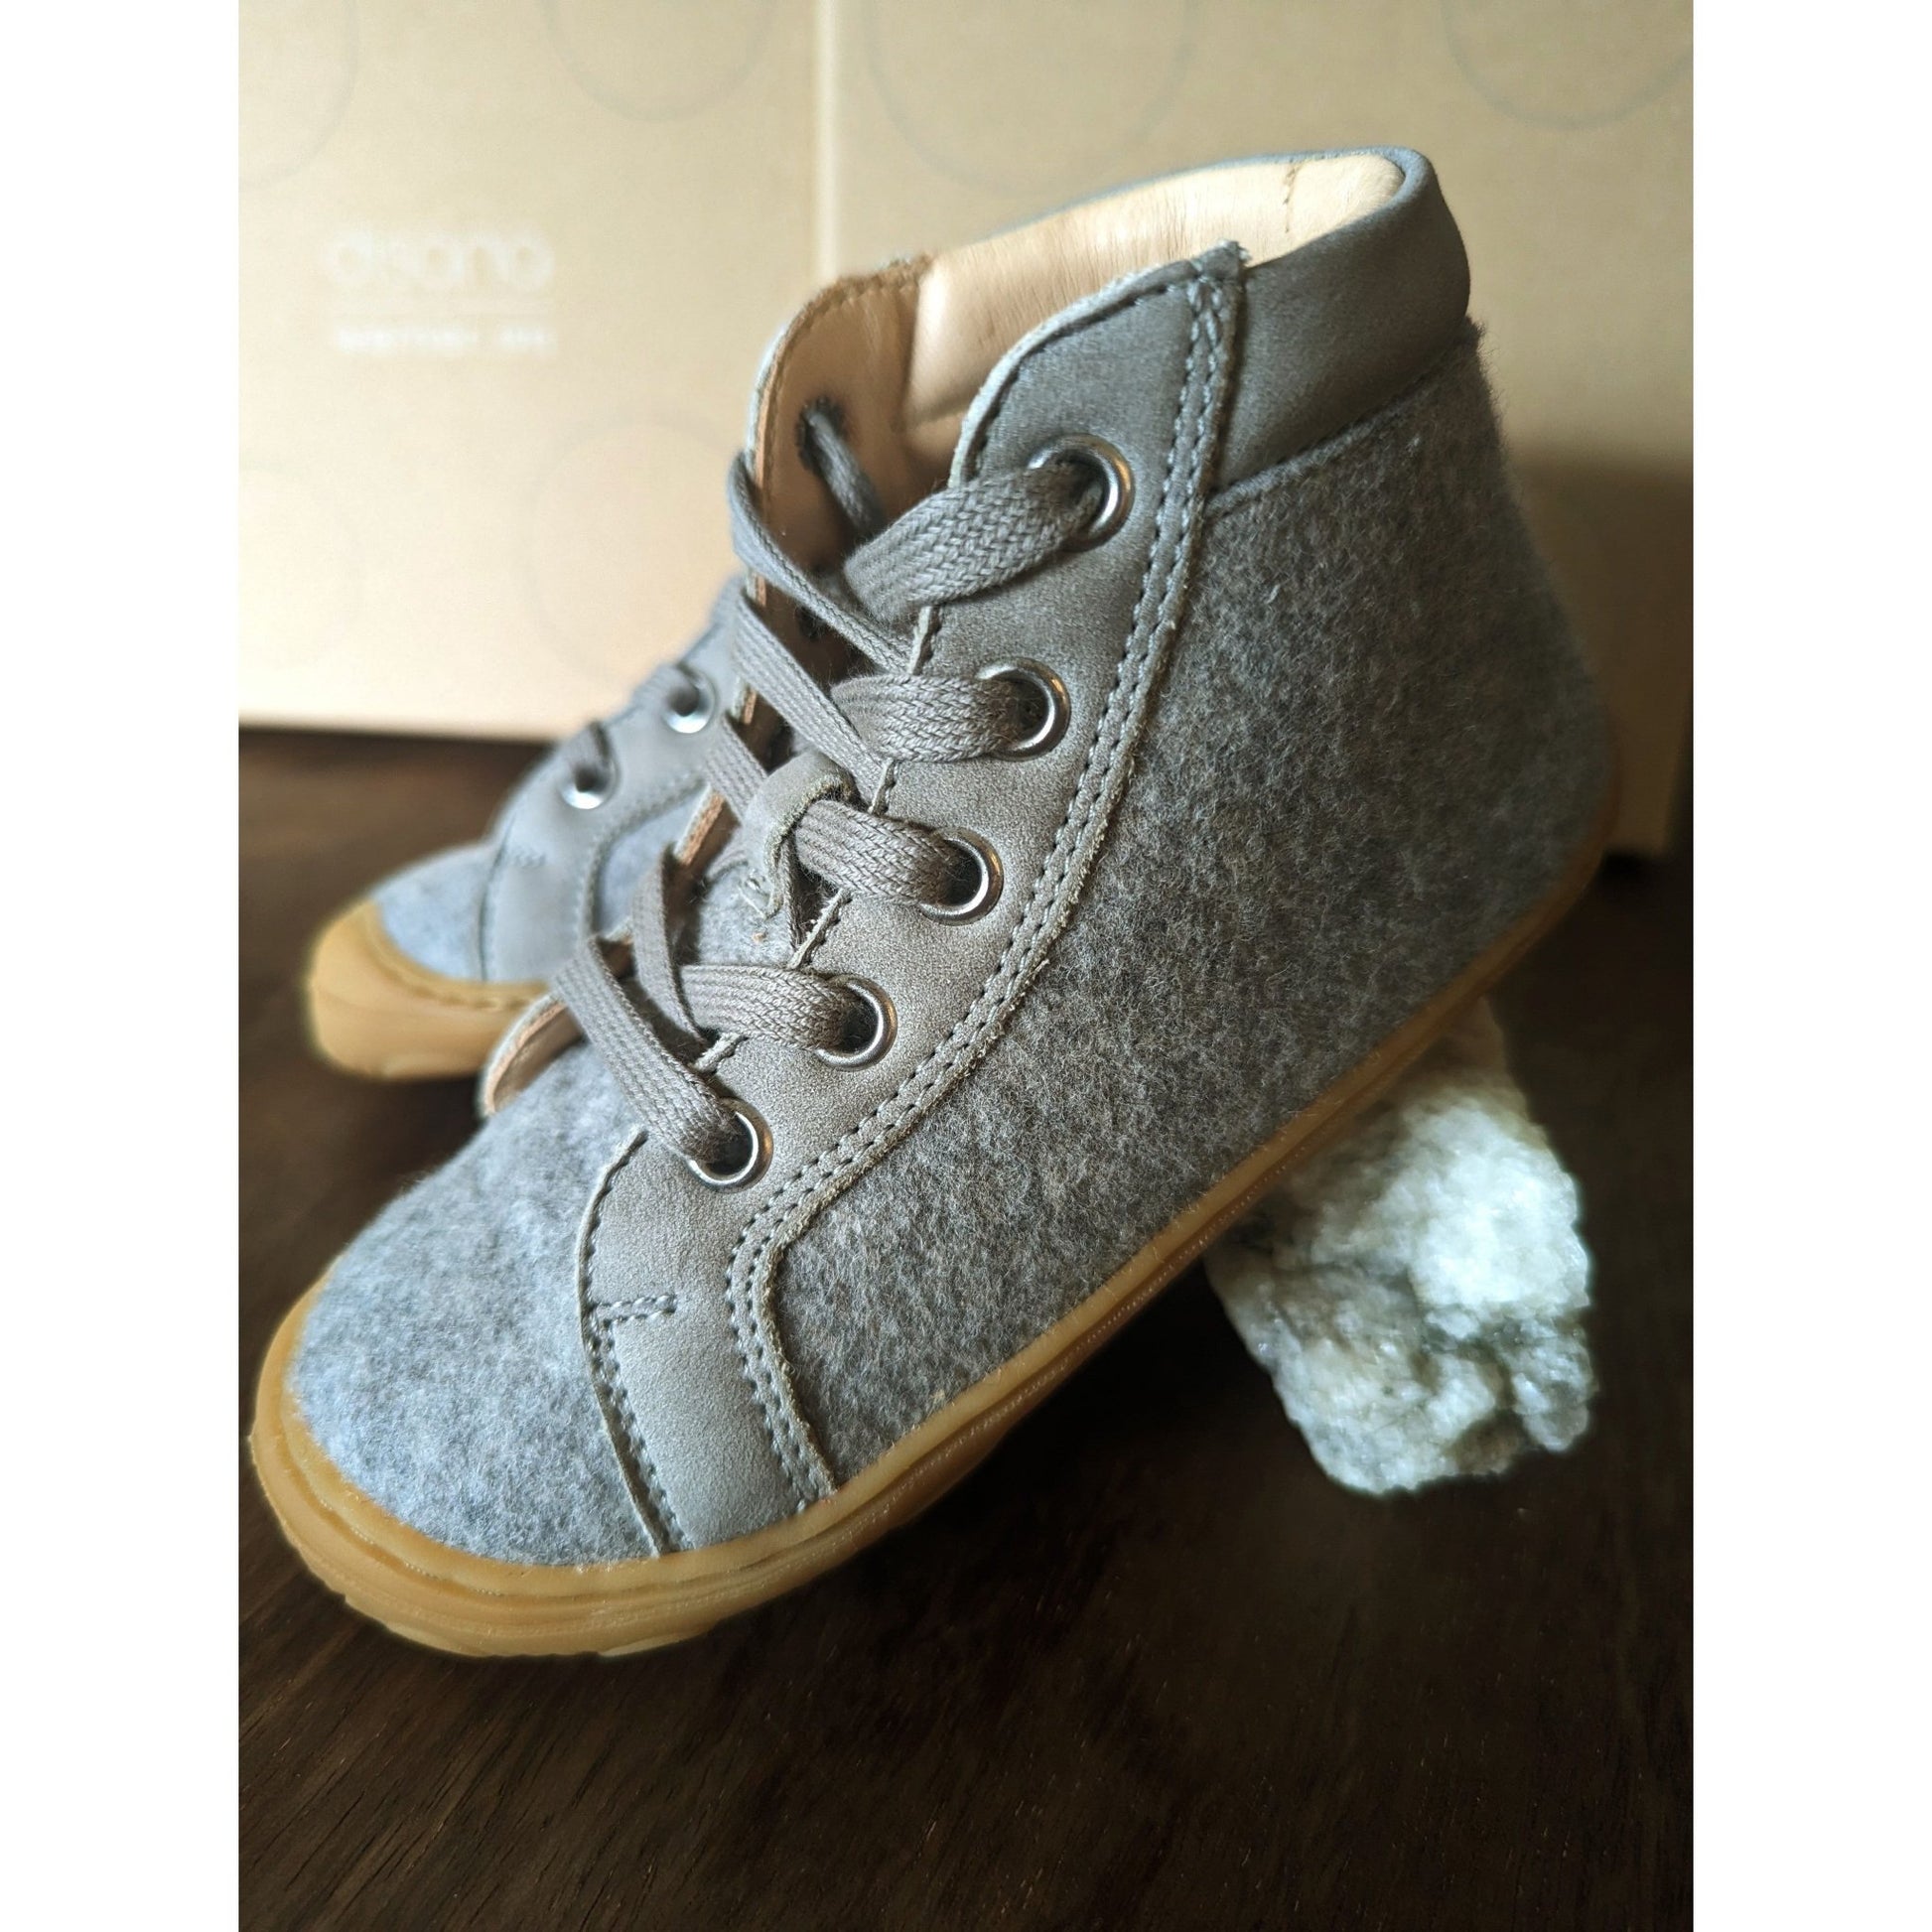 Disana - Organic - Wool Kids Shoes - Natural Rubber Soles - Laced - Nature's Wild Child